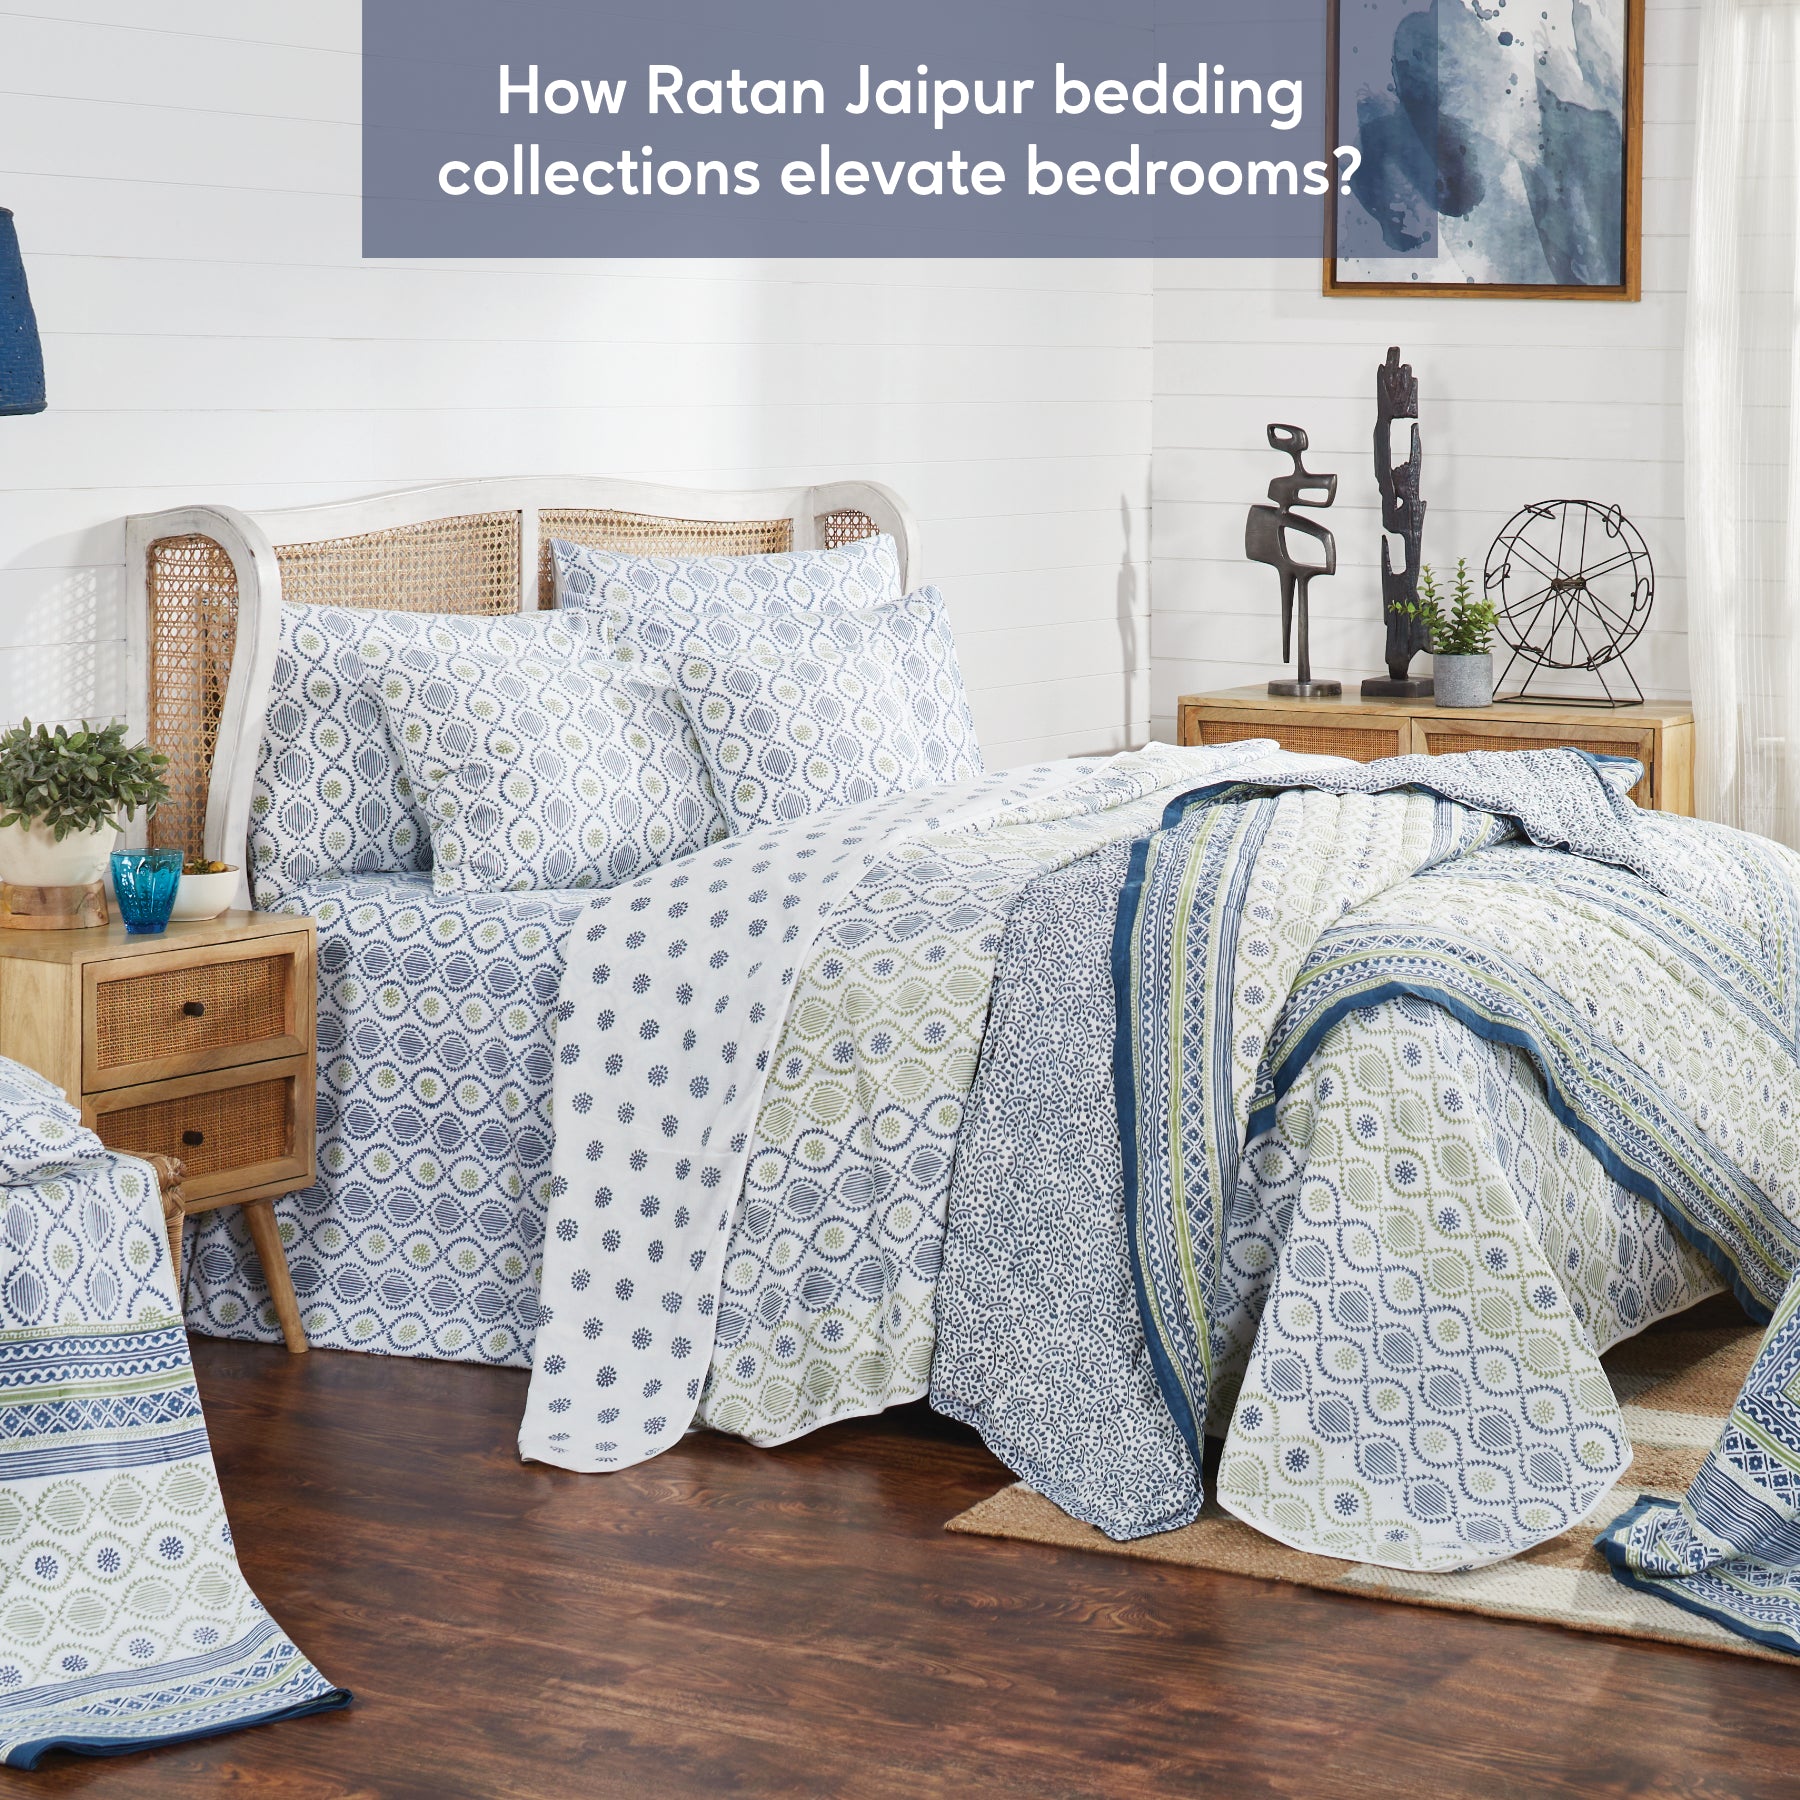 How Ratan Jaipur Bedding Collections Elevate Bedrooms?